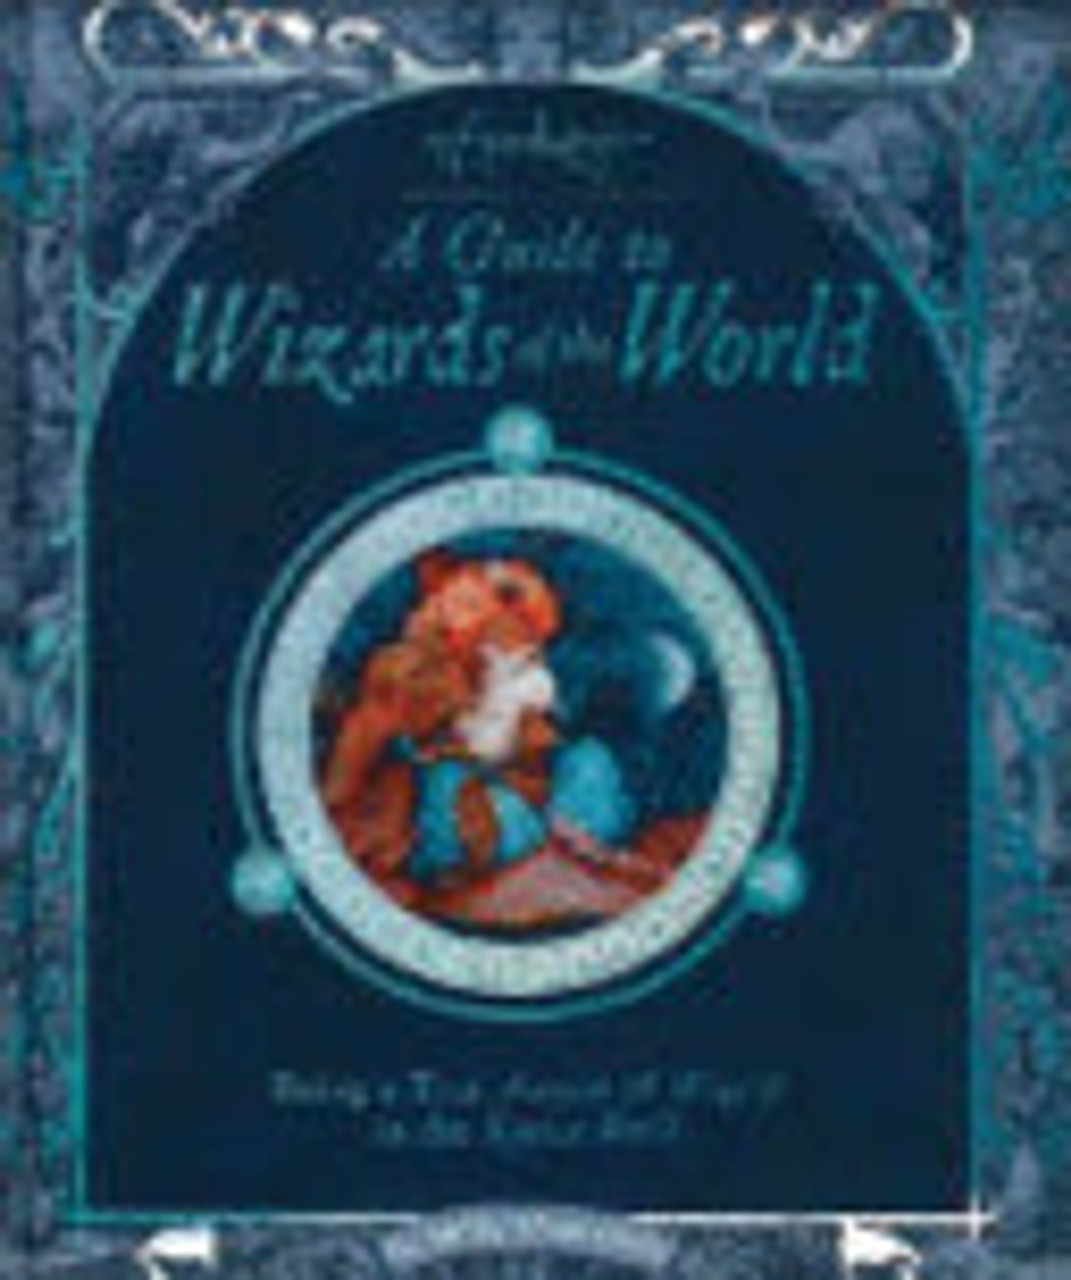 Master Merlin / A Guide to Wizards of the World (Children's Coffee Table book)